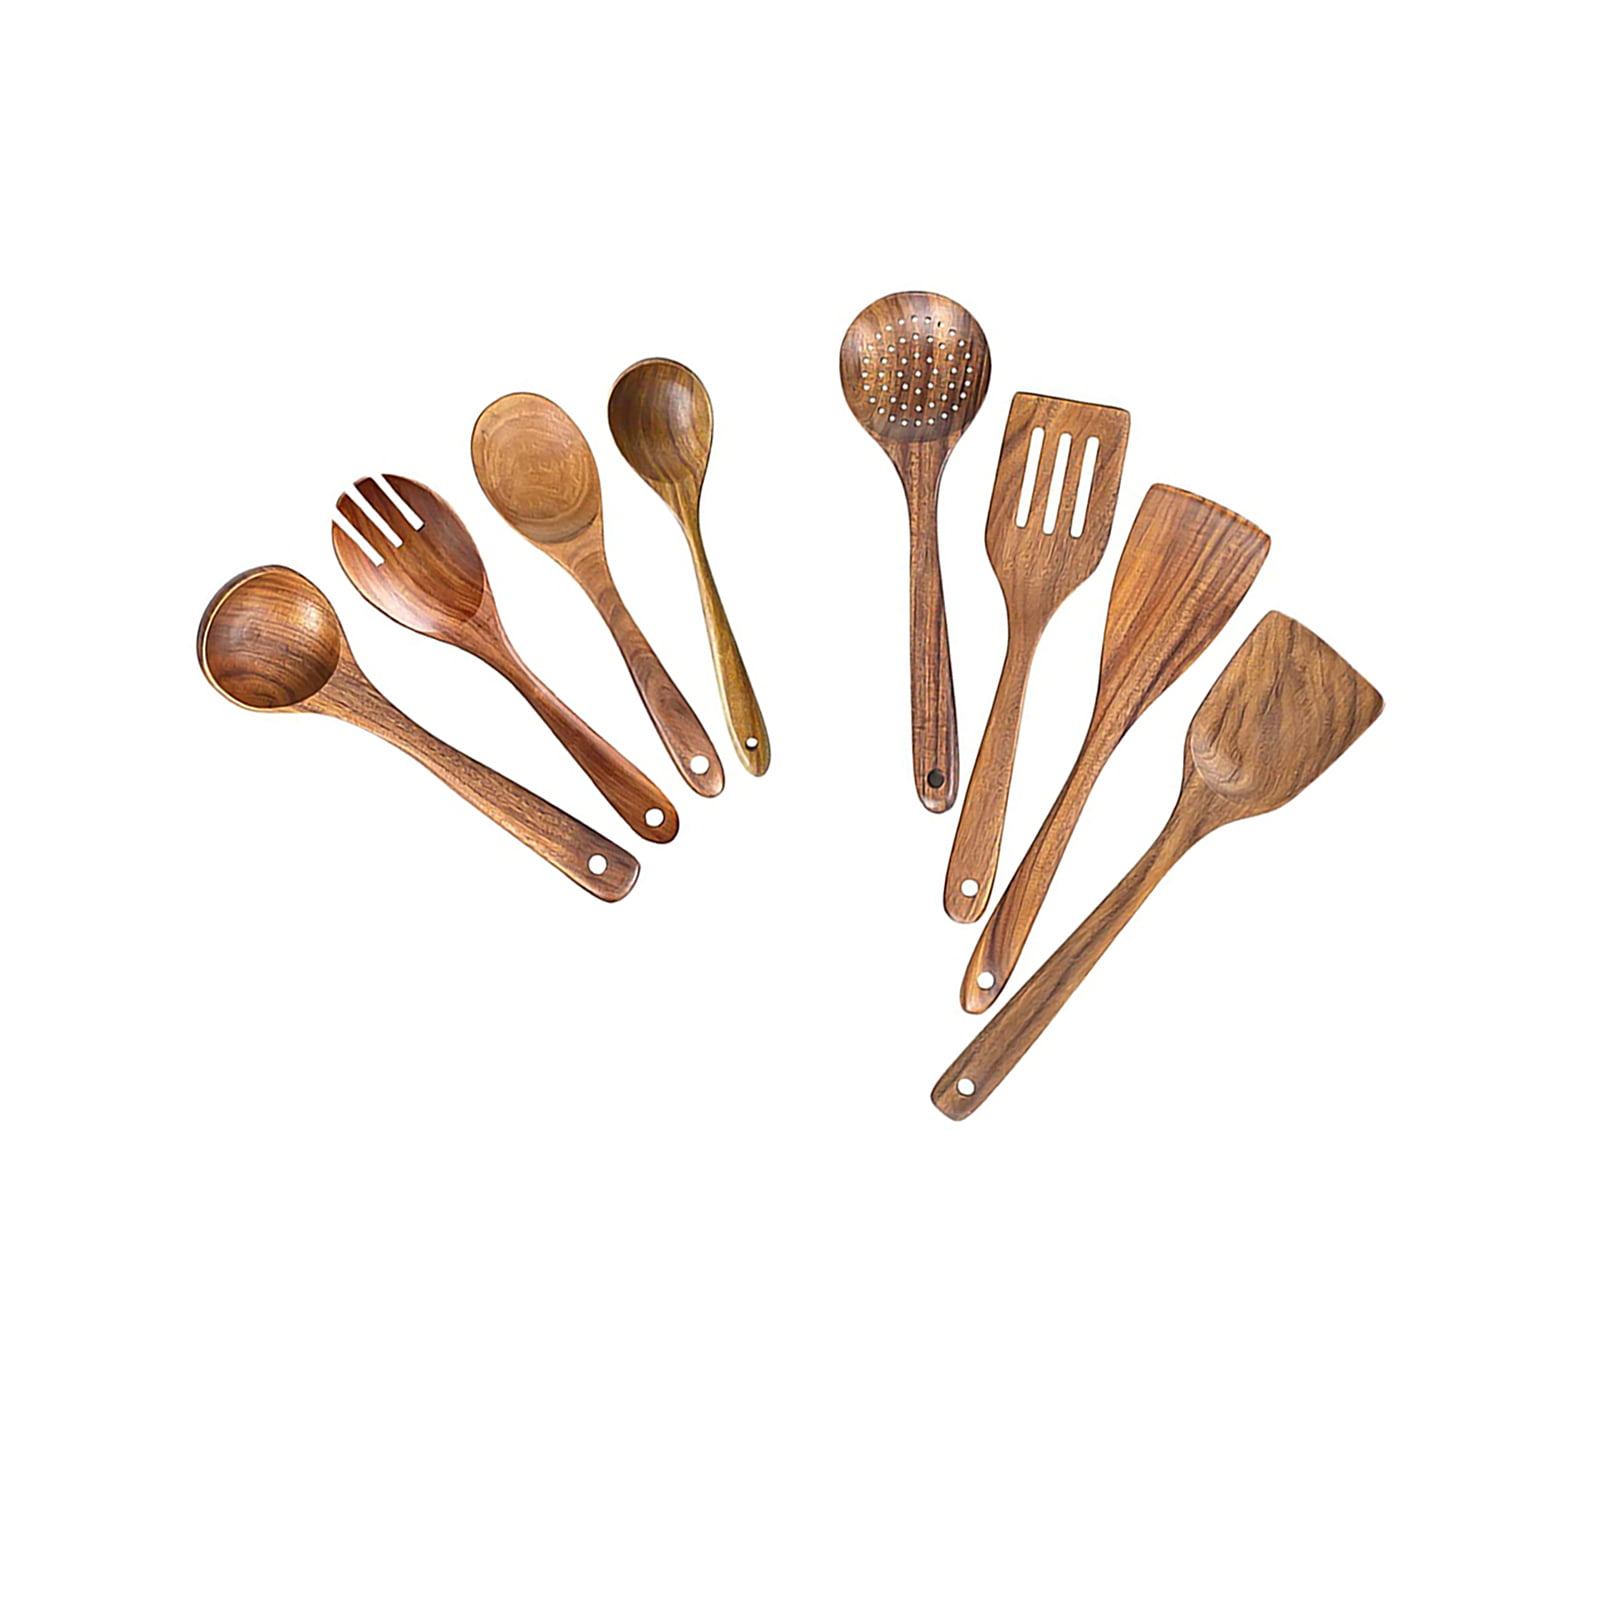 Wooden Spoons for Cooking Teak Wooden Kitchen Utensils Set Wooden Cooking Utensils 8Pcs Wooden Spatulas Wooden Utensils for Cooking 